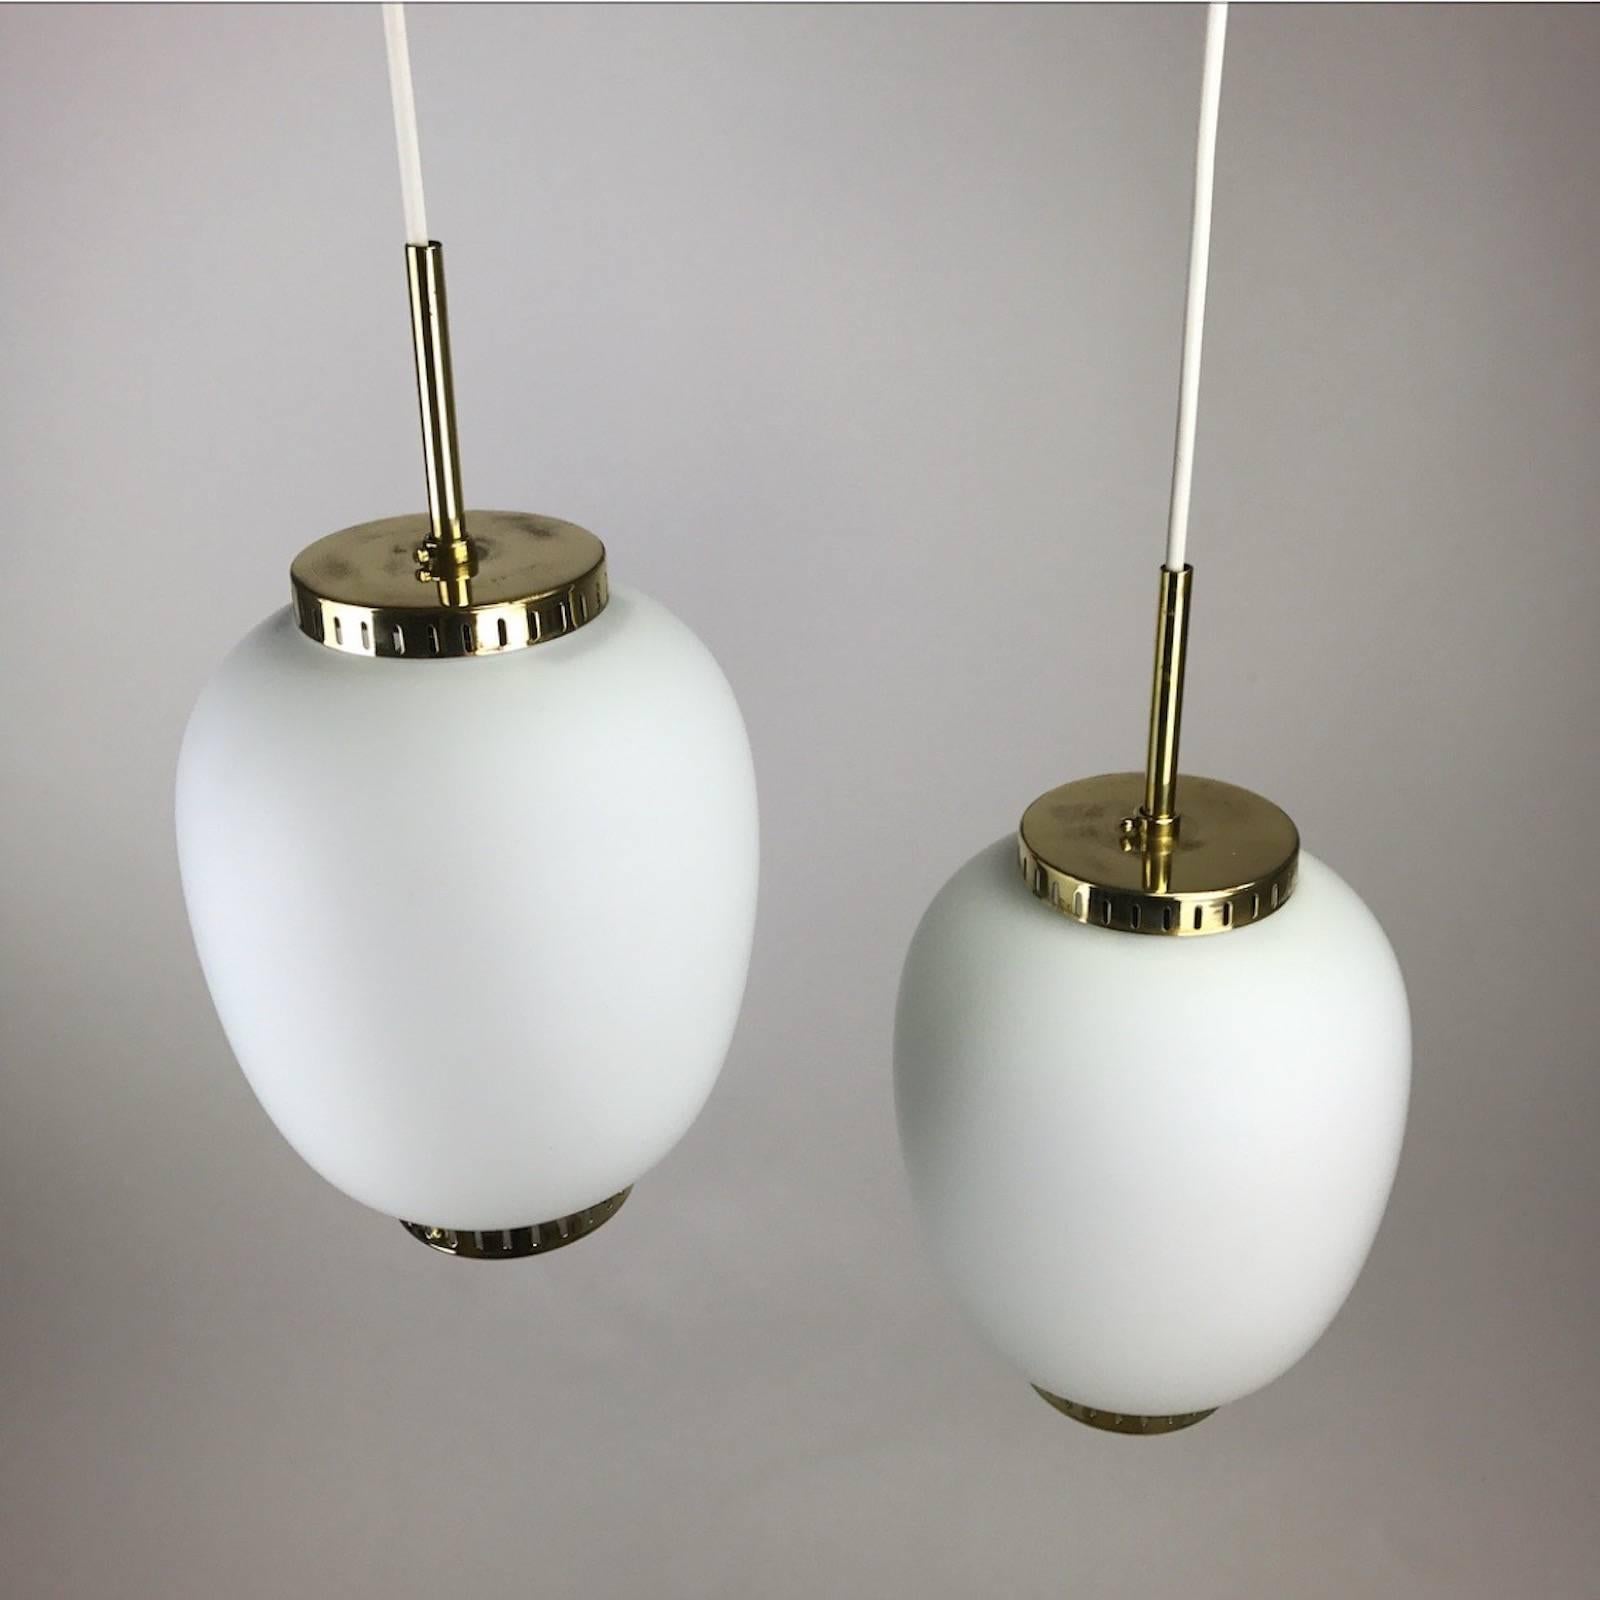 Bent Karlby was clearly inspired by the Chinese paper lanterns when he designed these Midcentury lights and they are also called China Pendant. A stunning Classic set of glass pendants by Bent Karlby for Lyfa, Denmark, early 1960s.

The 